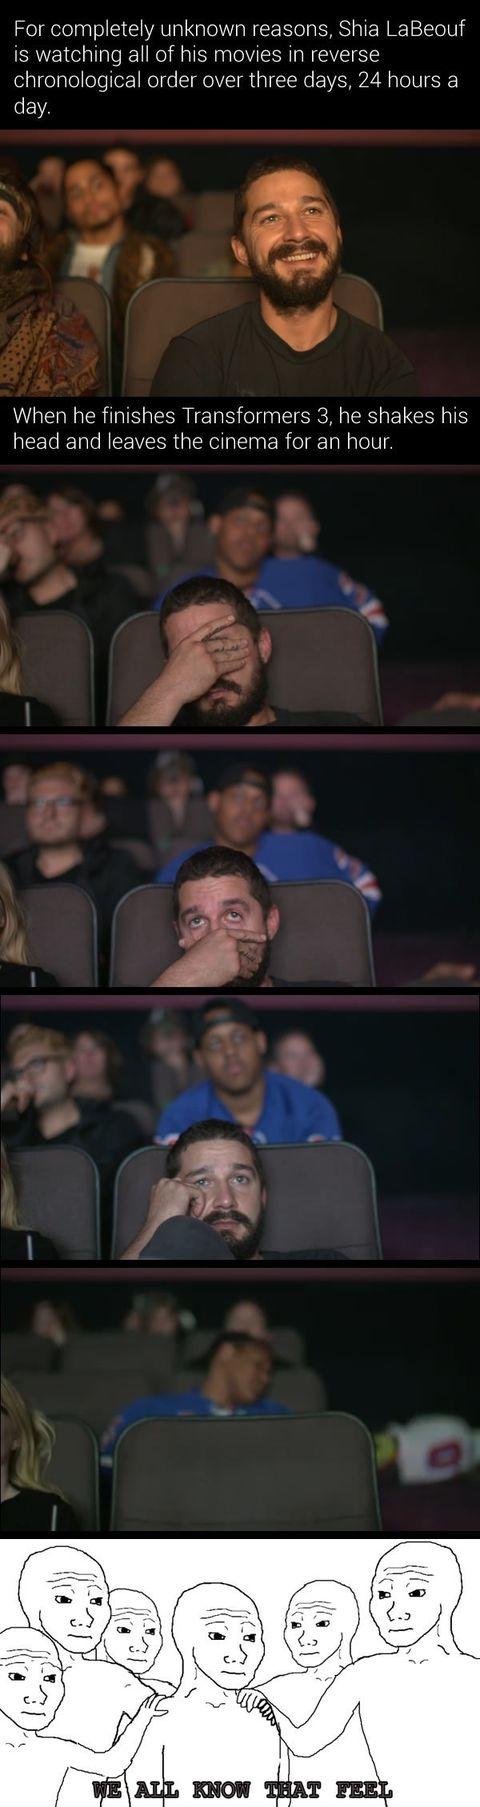 Shia LaBeouf face palmed so hard while watching the Transformers